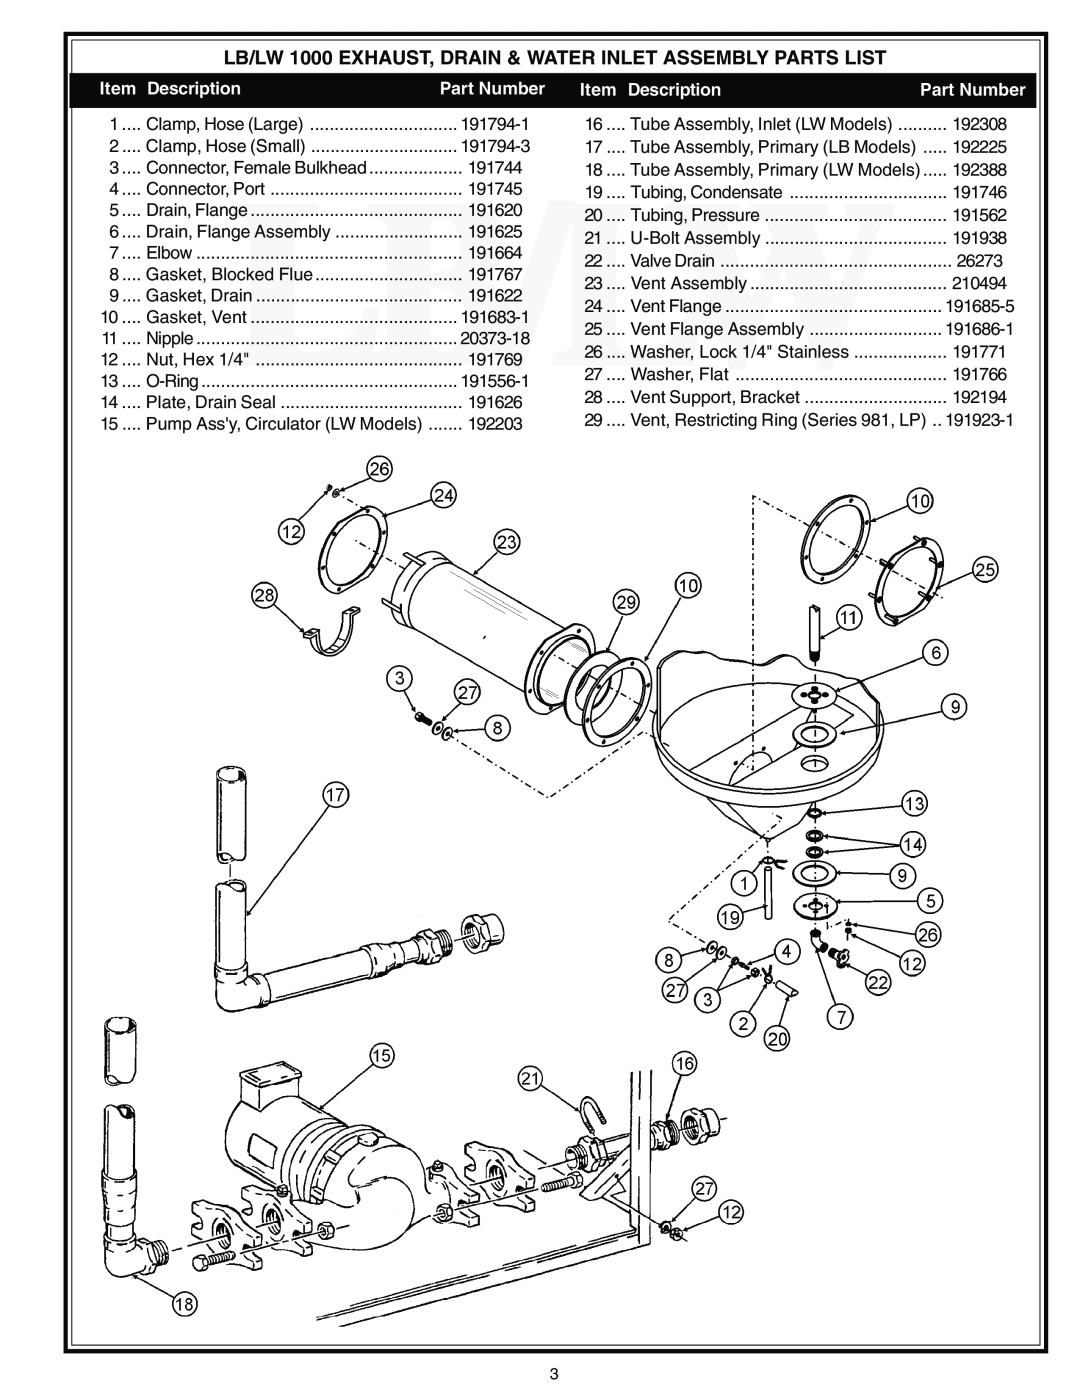 A.O. Smith 981 Series, 980 Series LB/LW 1000 EXHAUST, DRAIN & WATER INLET ASSEMBLY PARTS LIST, Description, Part Number 